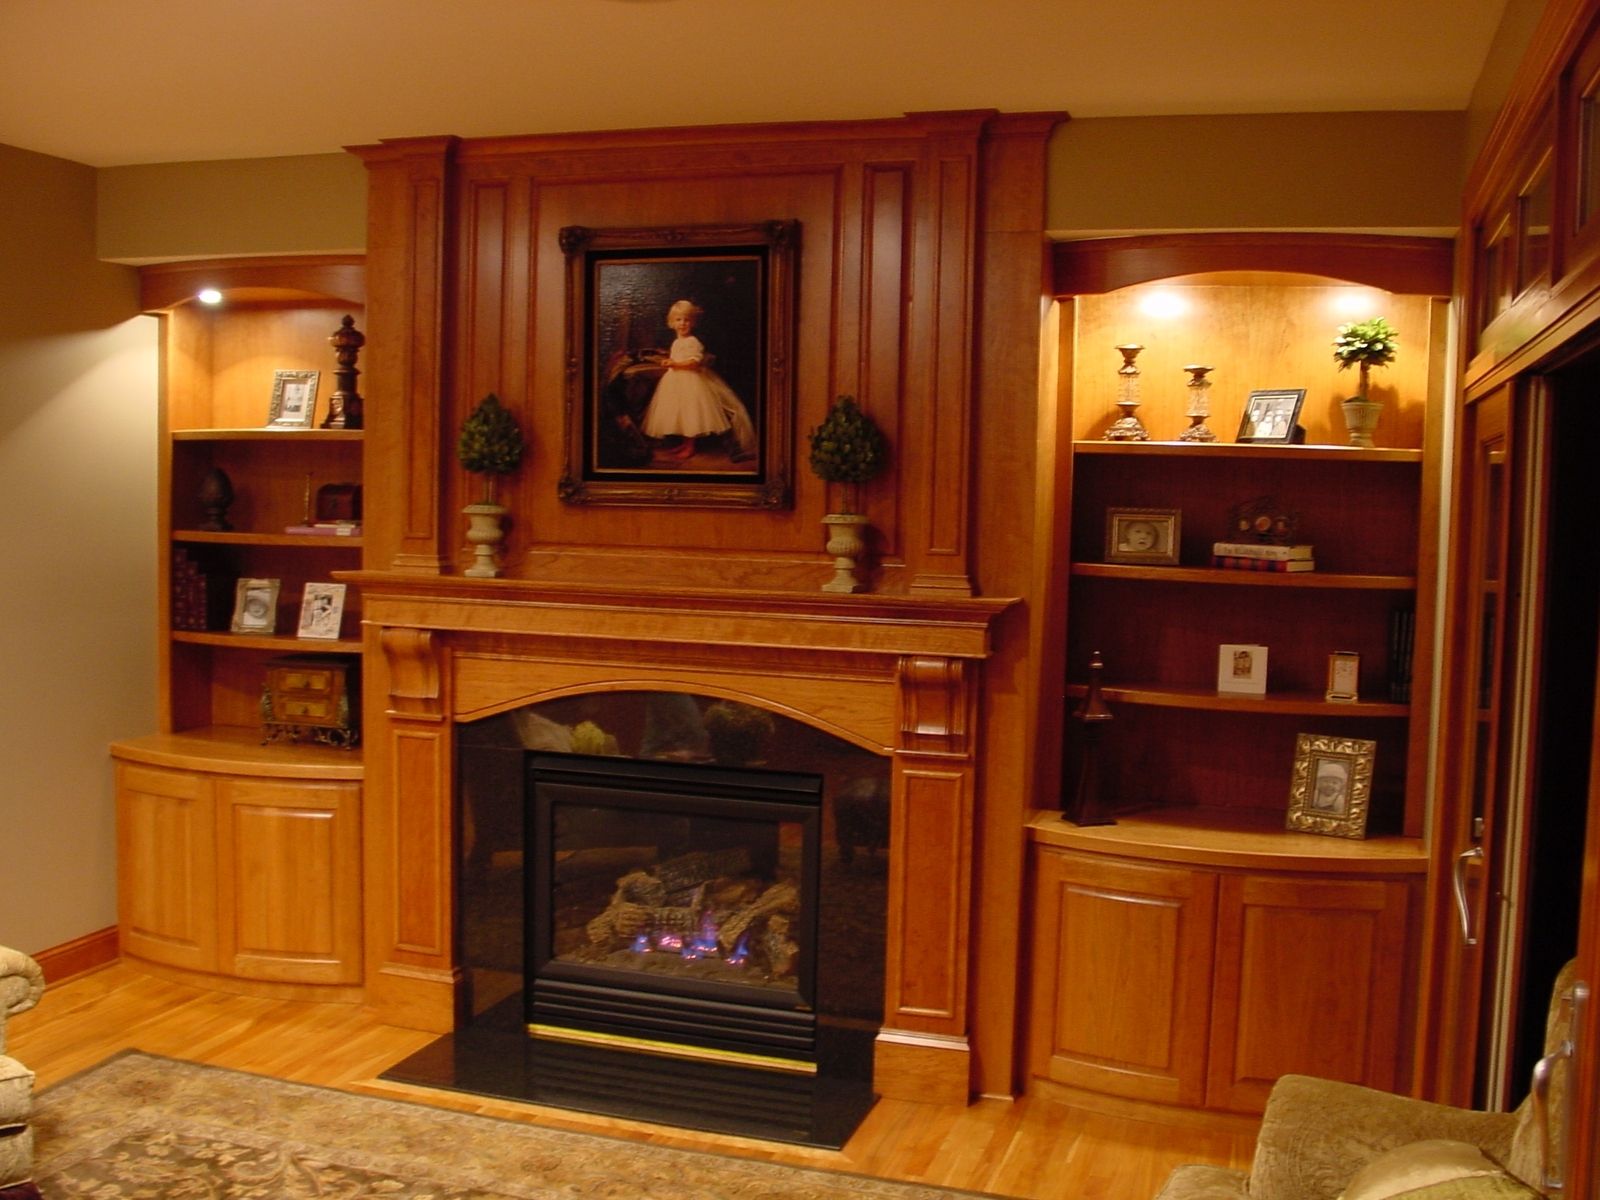 Fireplace Mantel And Built In Shelving, Fireplace Mantel Bookcase Ideas